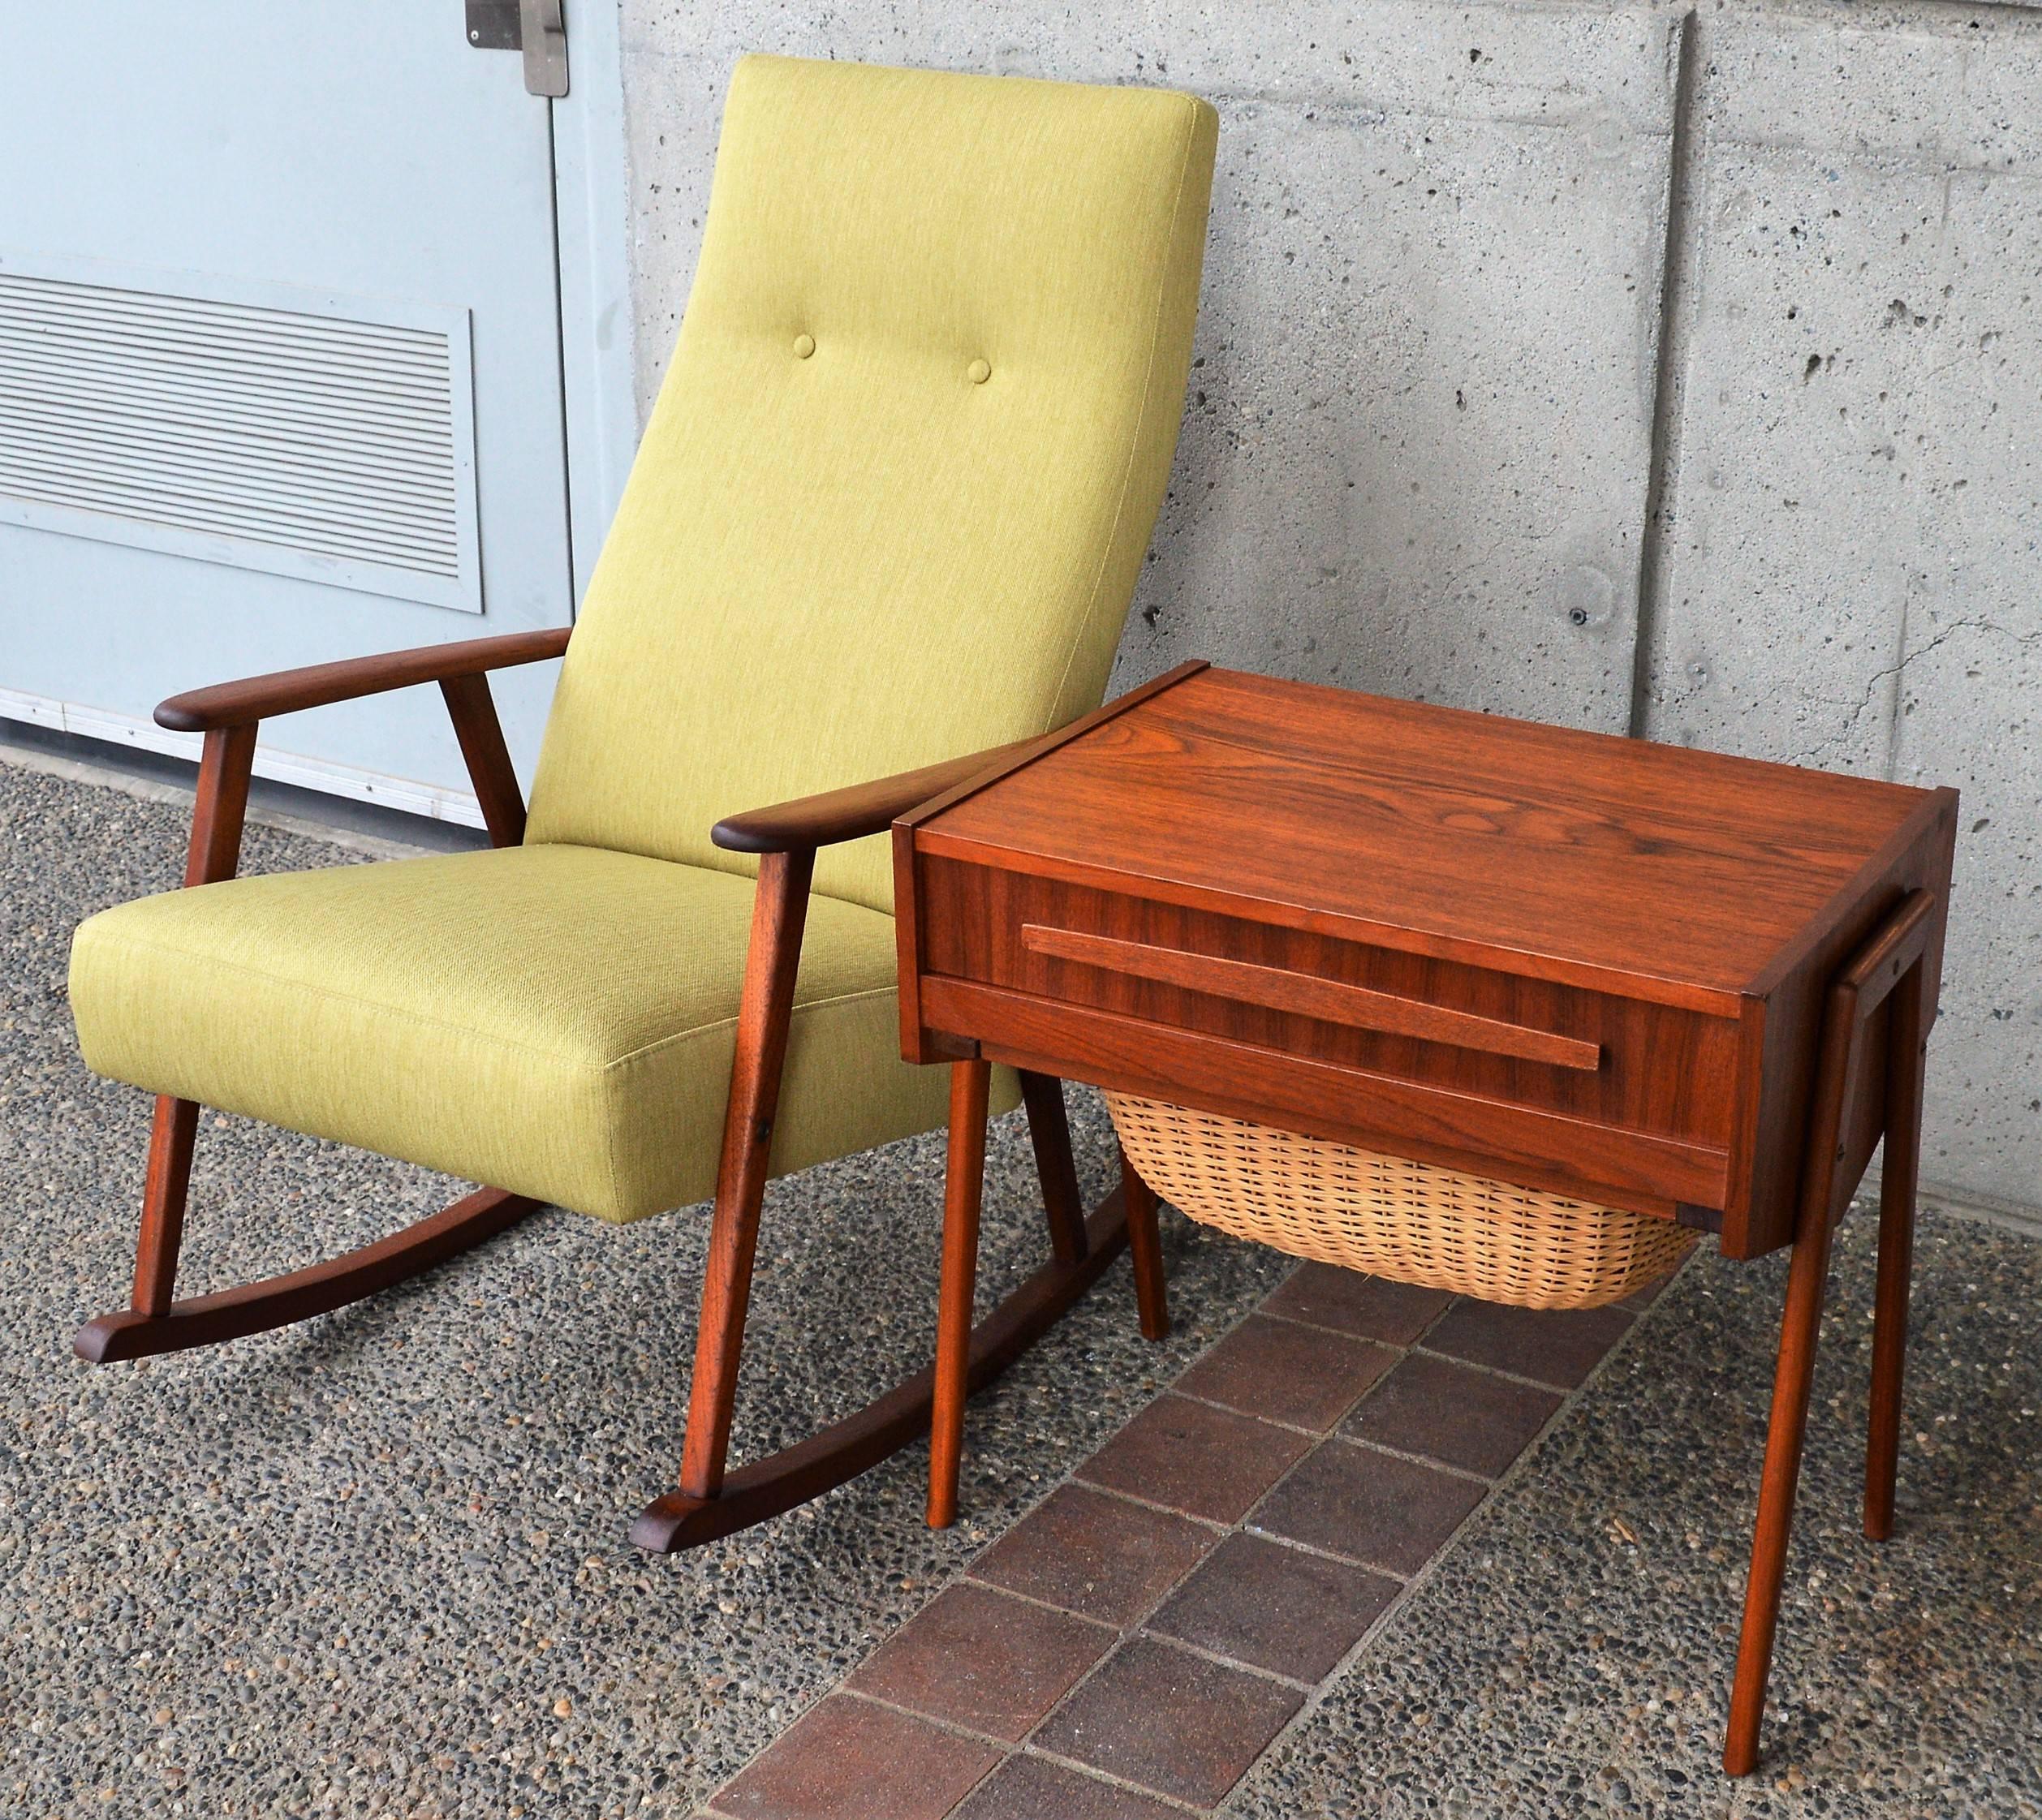 Mid-Century Modern Danish Teak Atomic Style Side Table with Segmented Drawer and Basket